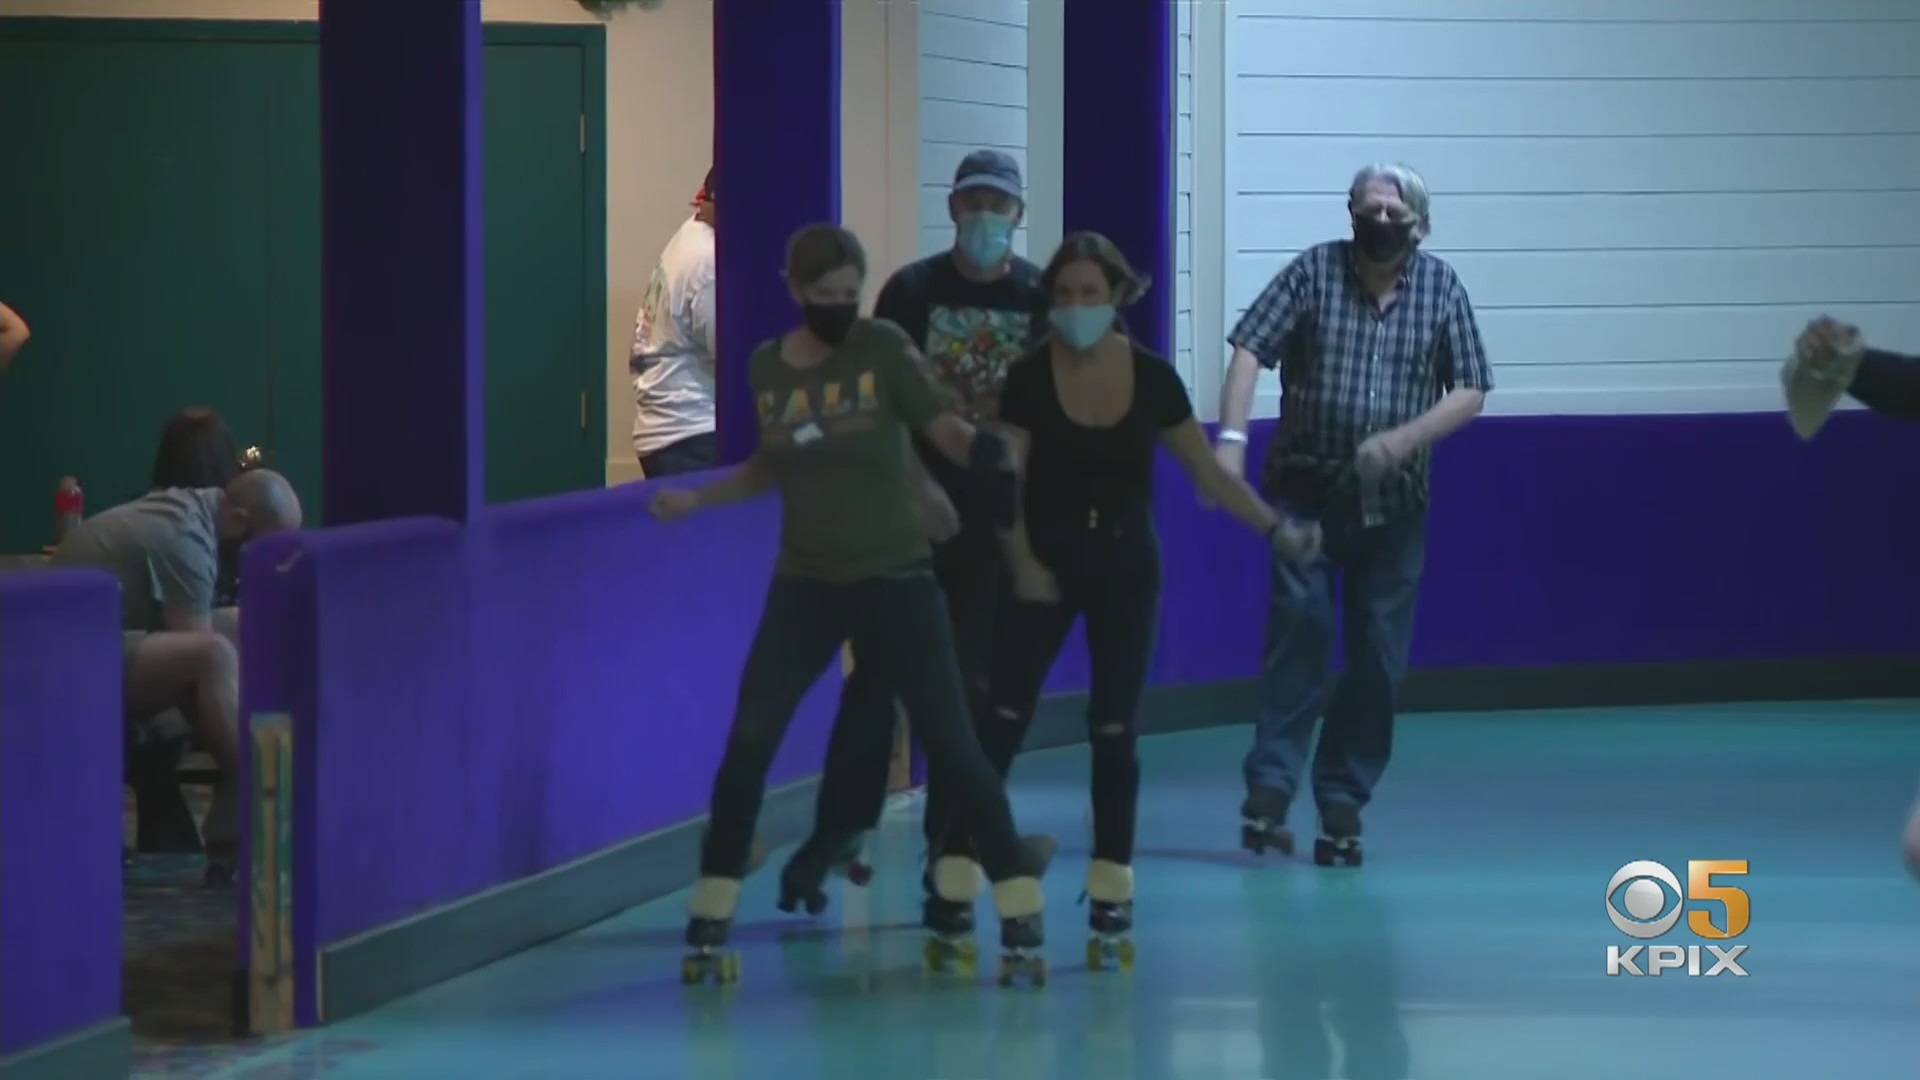 Skaters at The Golden State roller rink in San Ramon, November 10, 2021. (CBS)